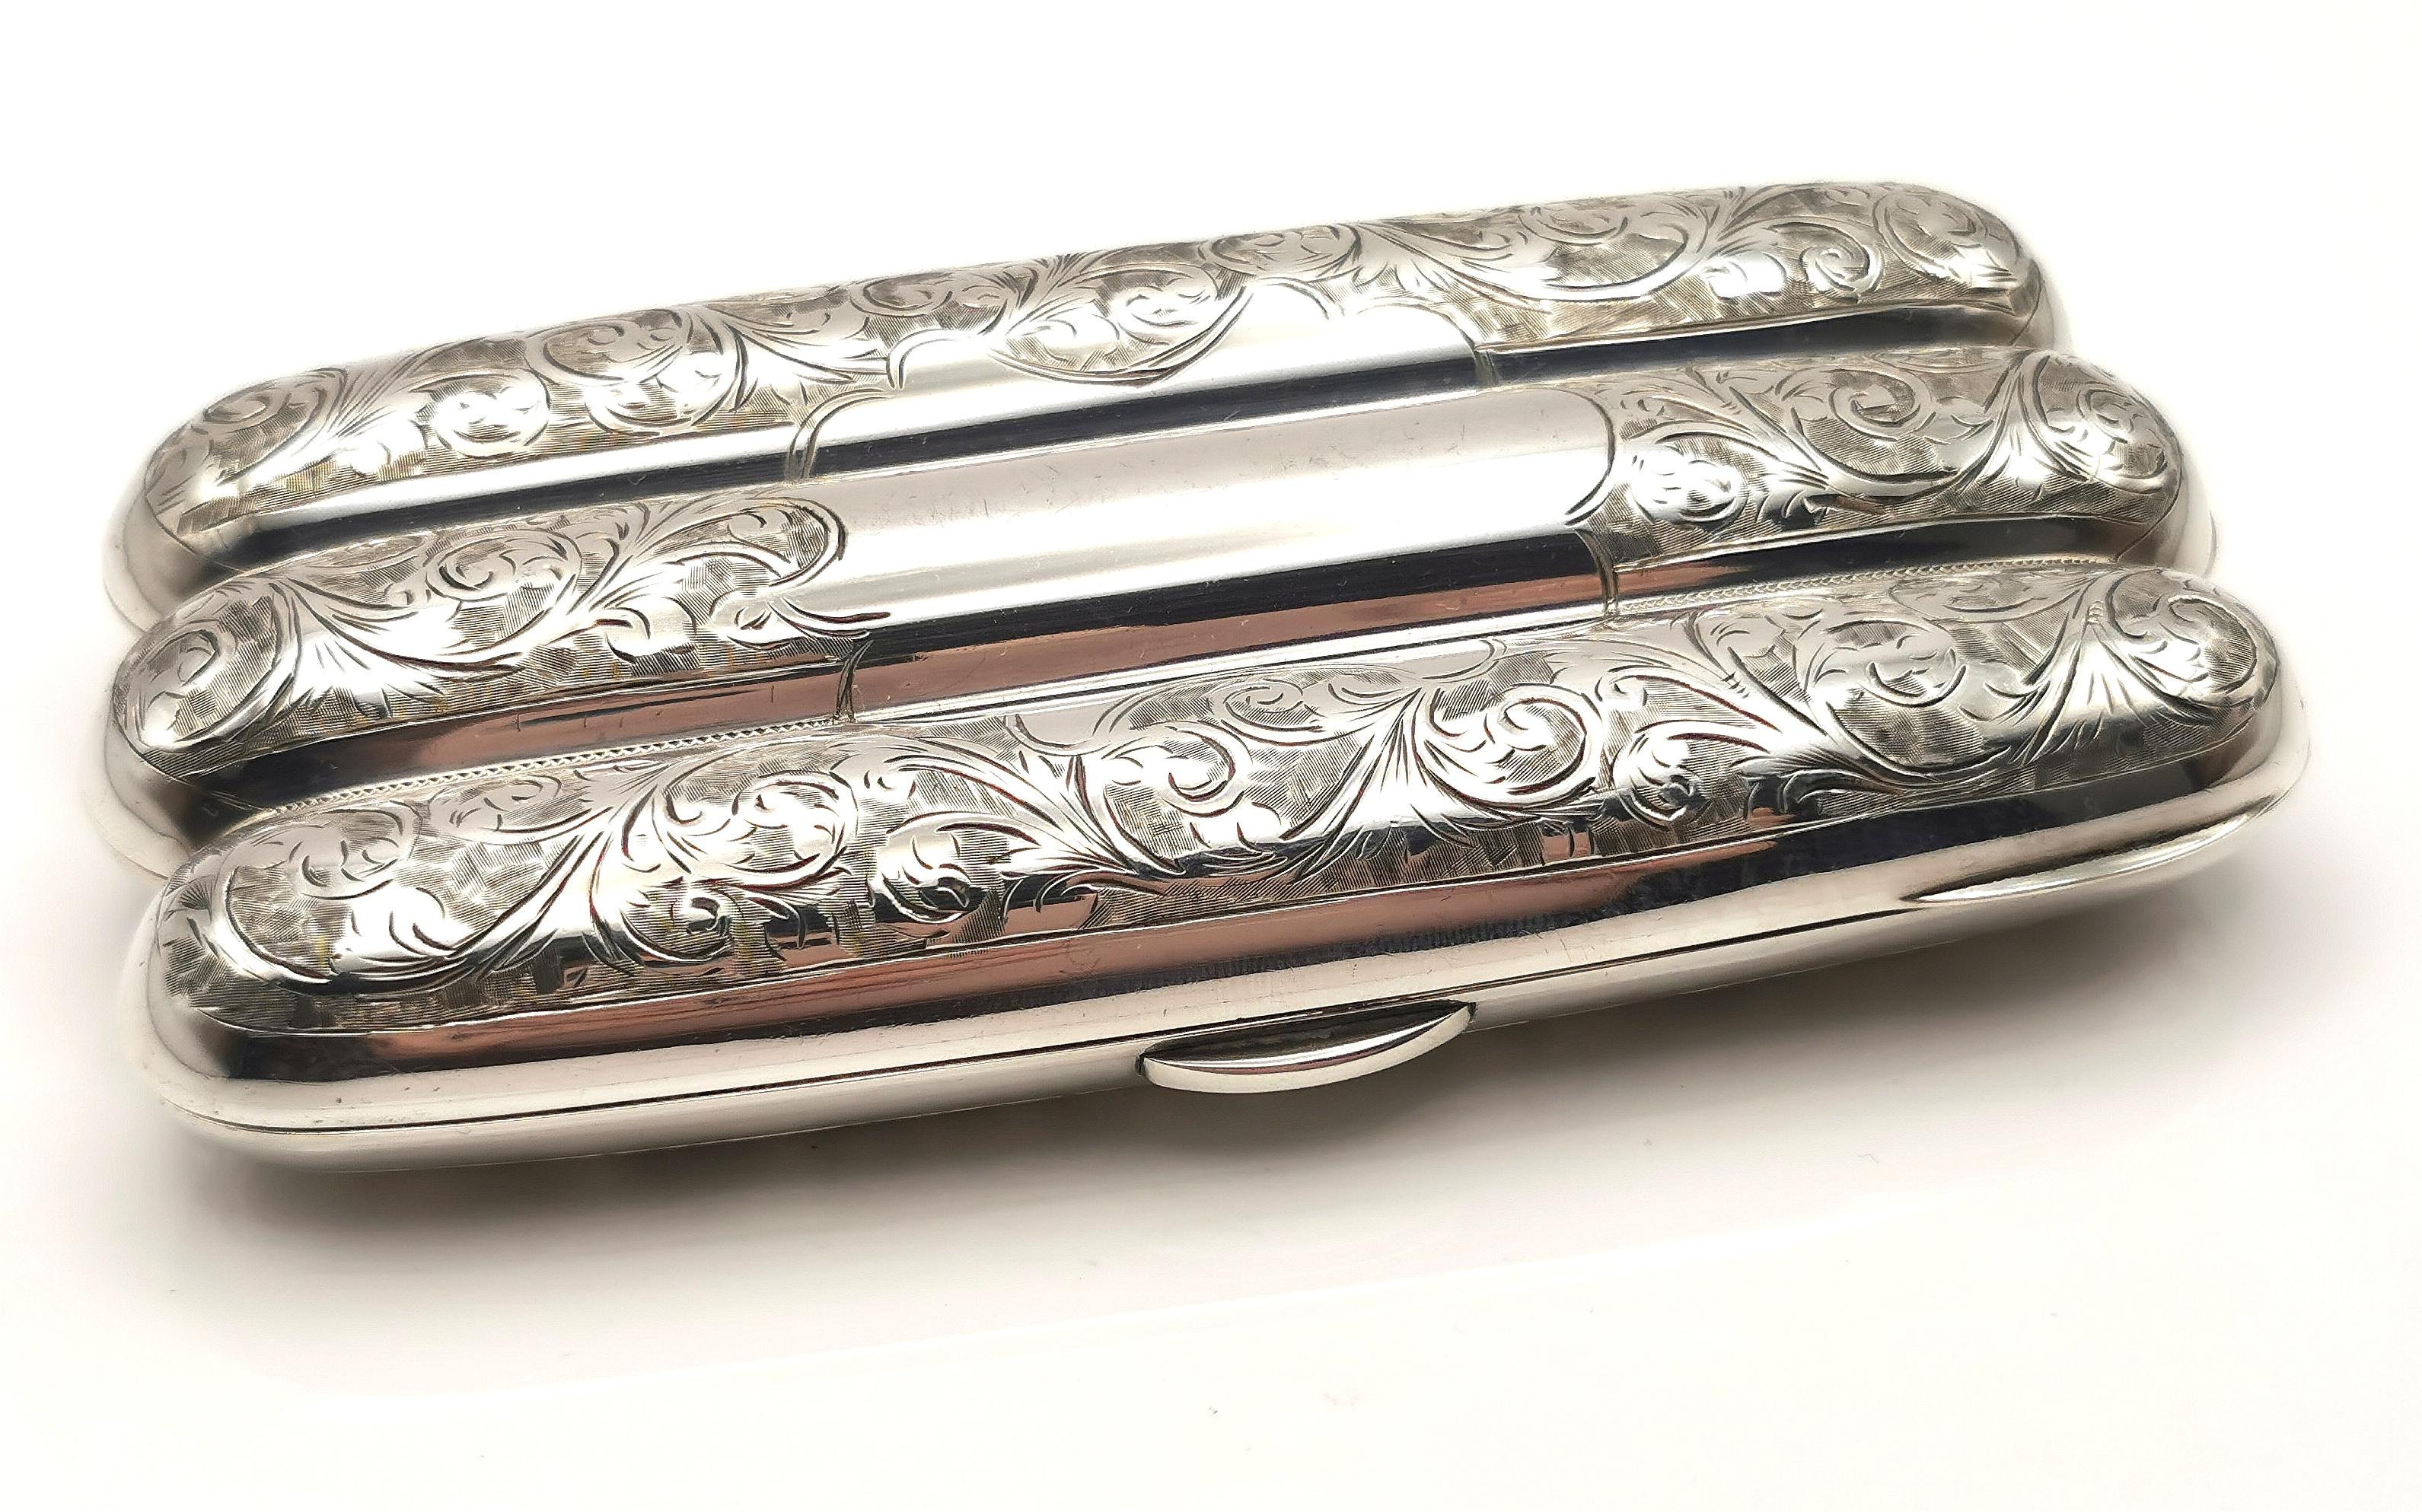 An attractive and decorative antique sterling silver cigar case.

A lovely substantial and heavy piece, made from heavily engraved sterling silver, the case is gilt lined and still retains most of its rich gilt finish.

The engraving has a foliate